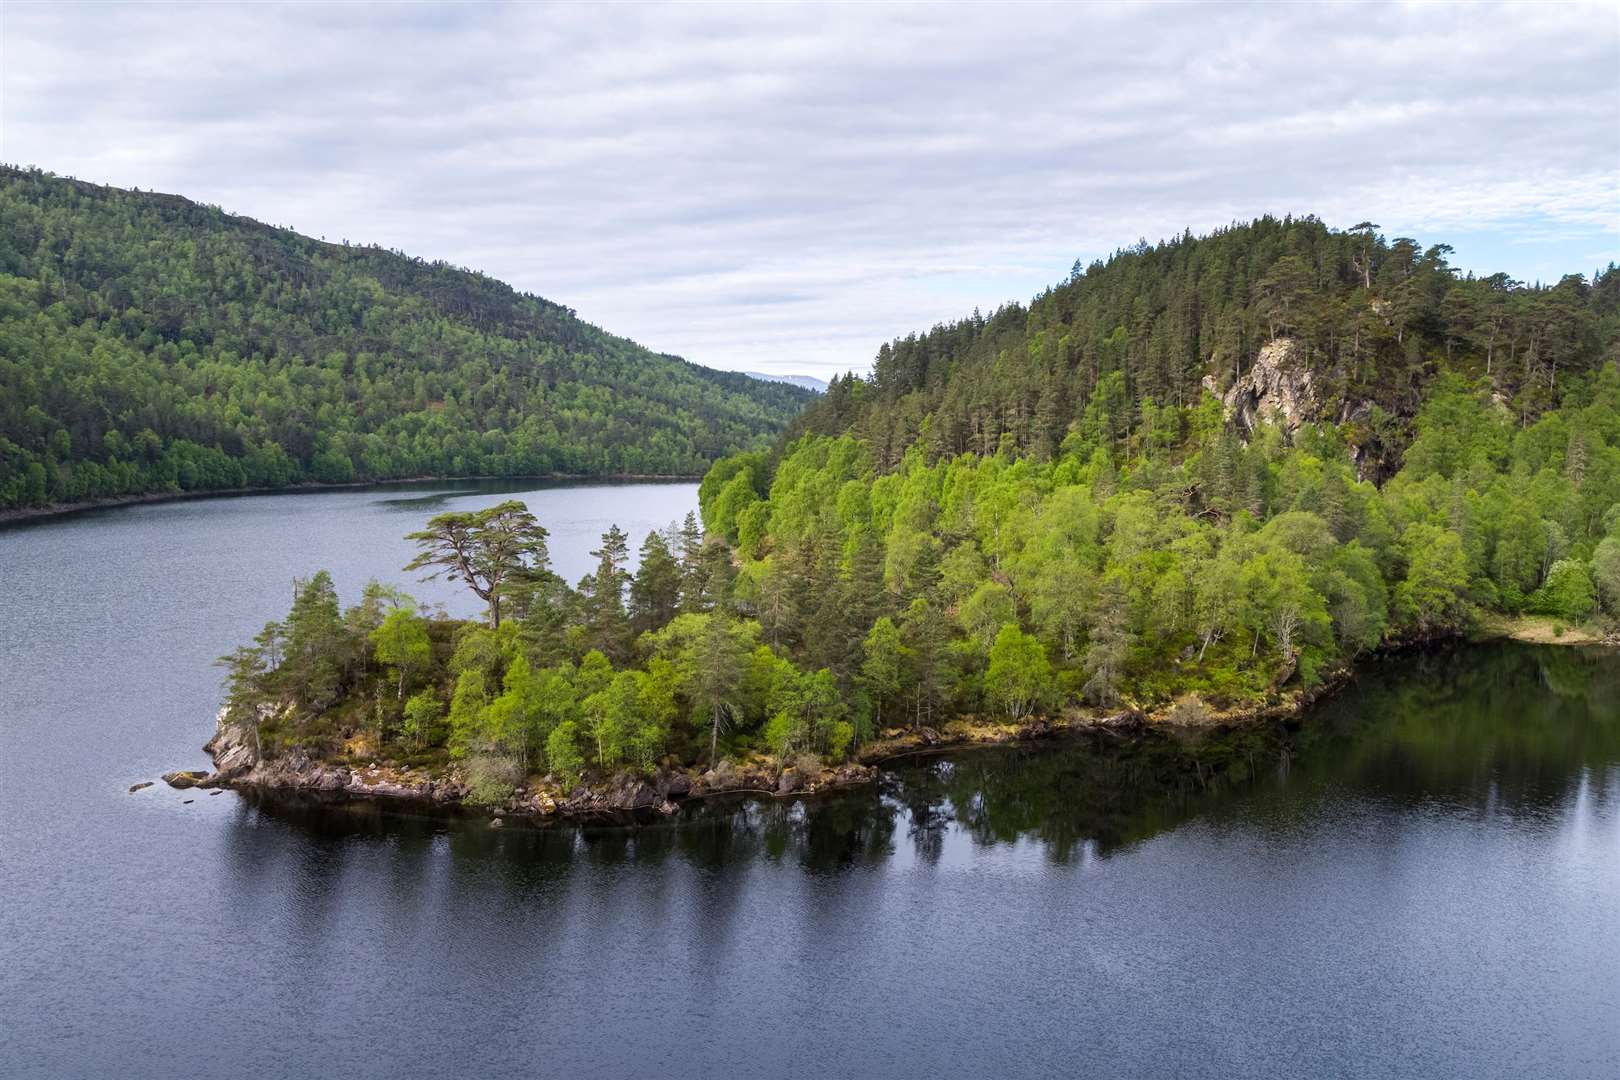 Caledonian forest surrounding Loch Beinn a Mheadhoin in Glen Affric National Nature Reserve, Scotland.